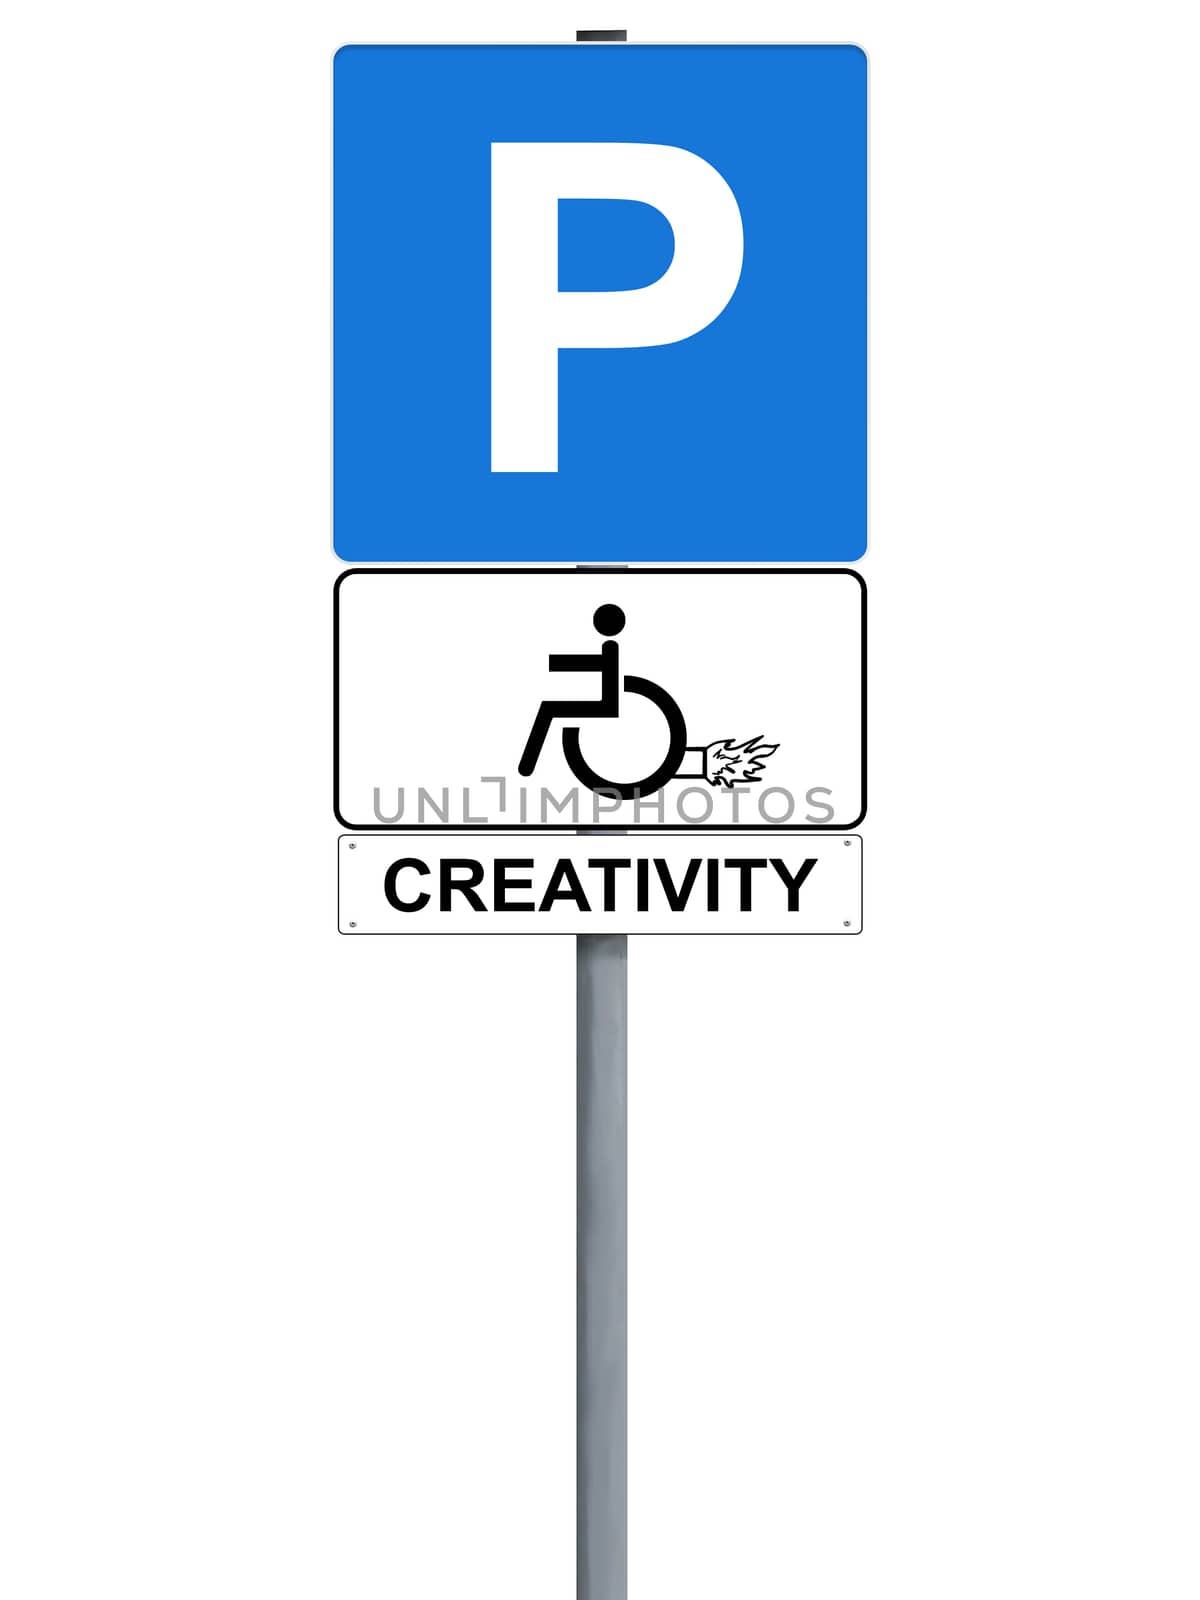 Parking spot for handicapped sign with drawing of rocket, isolated on white with title creativity